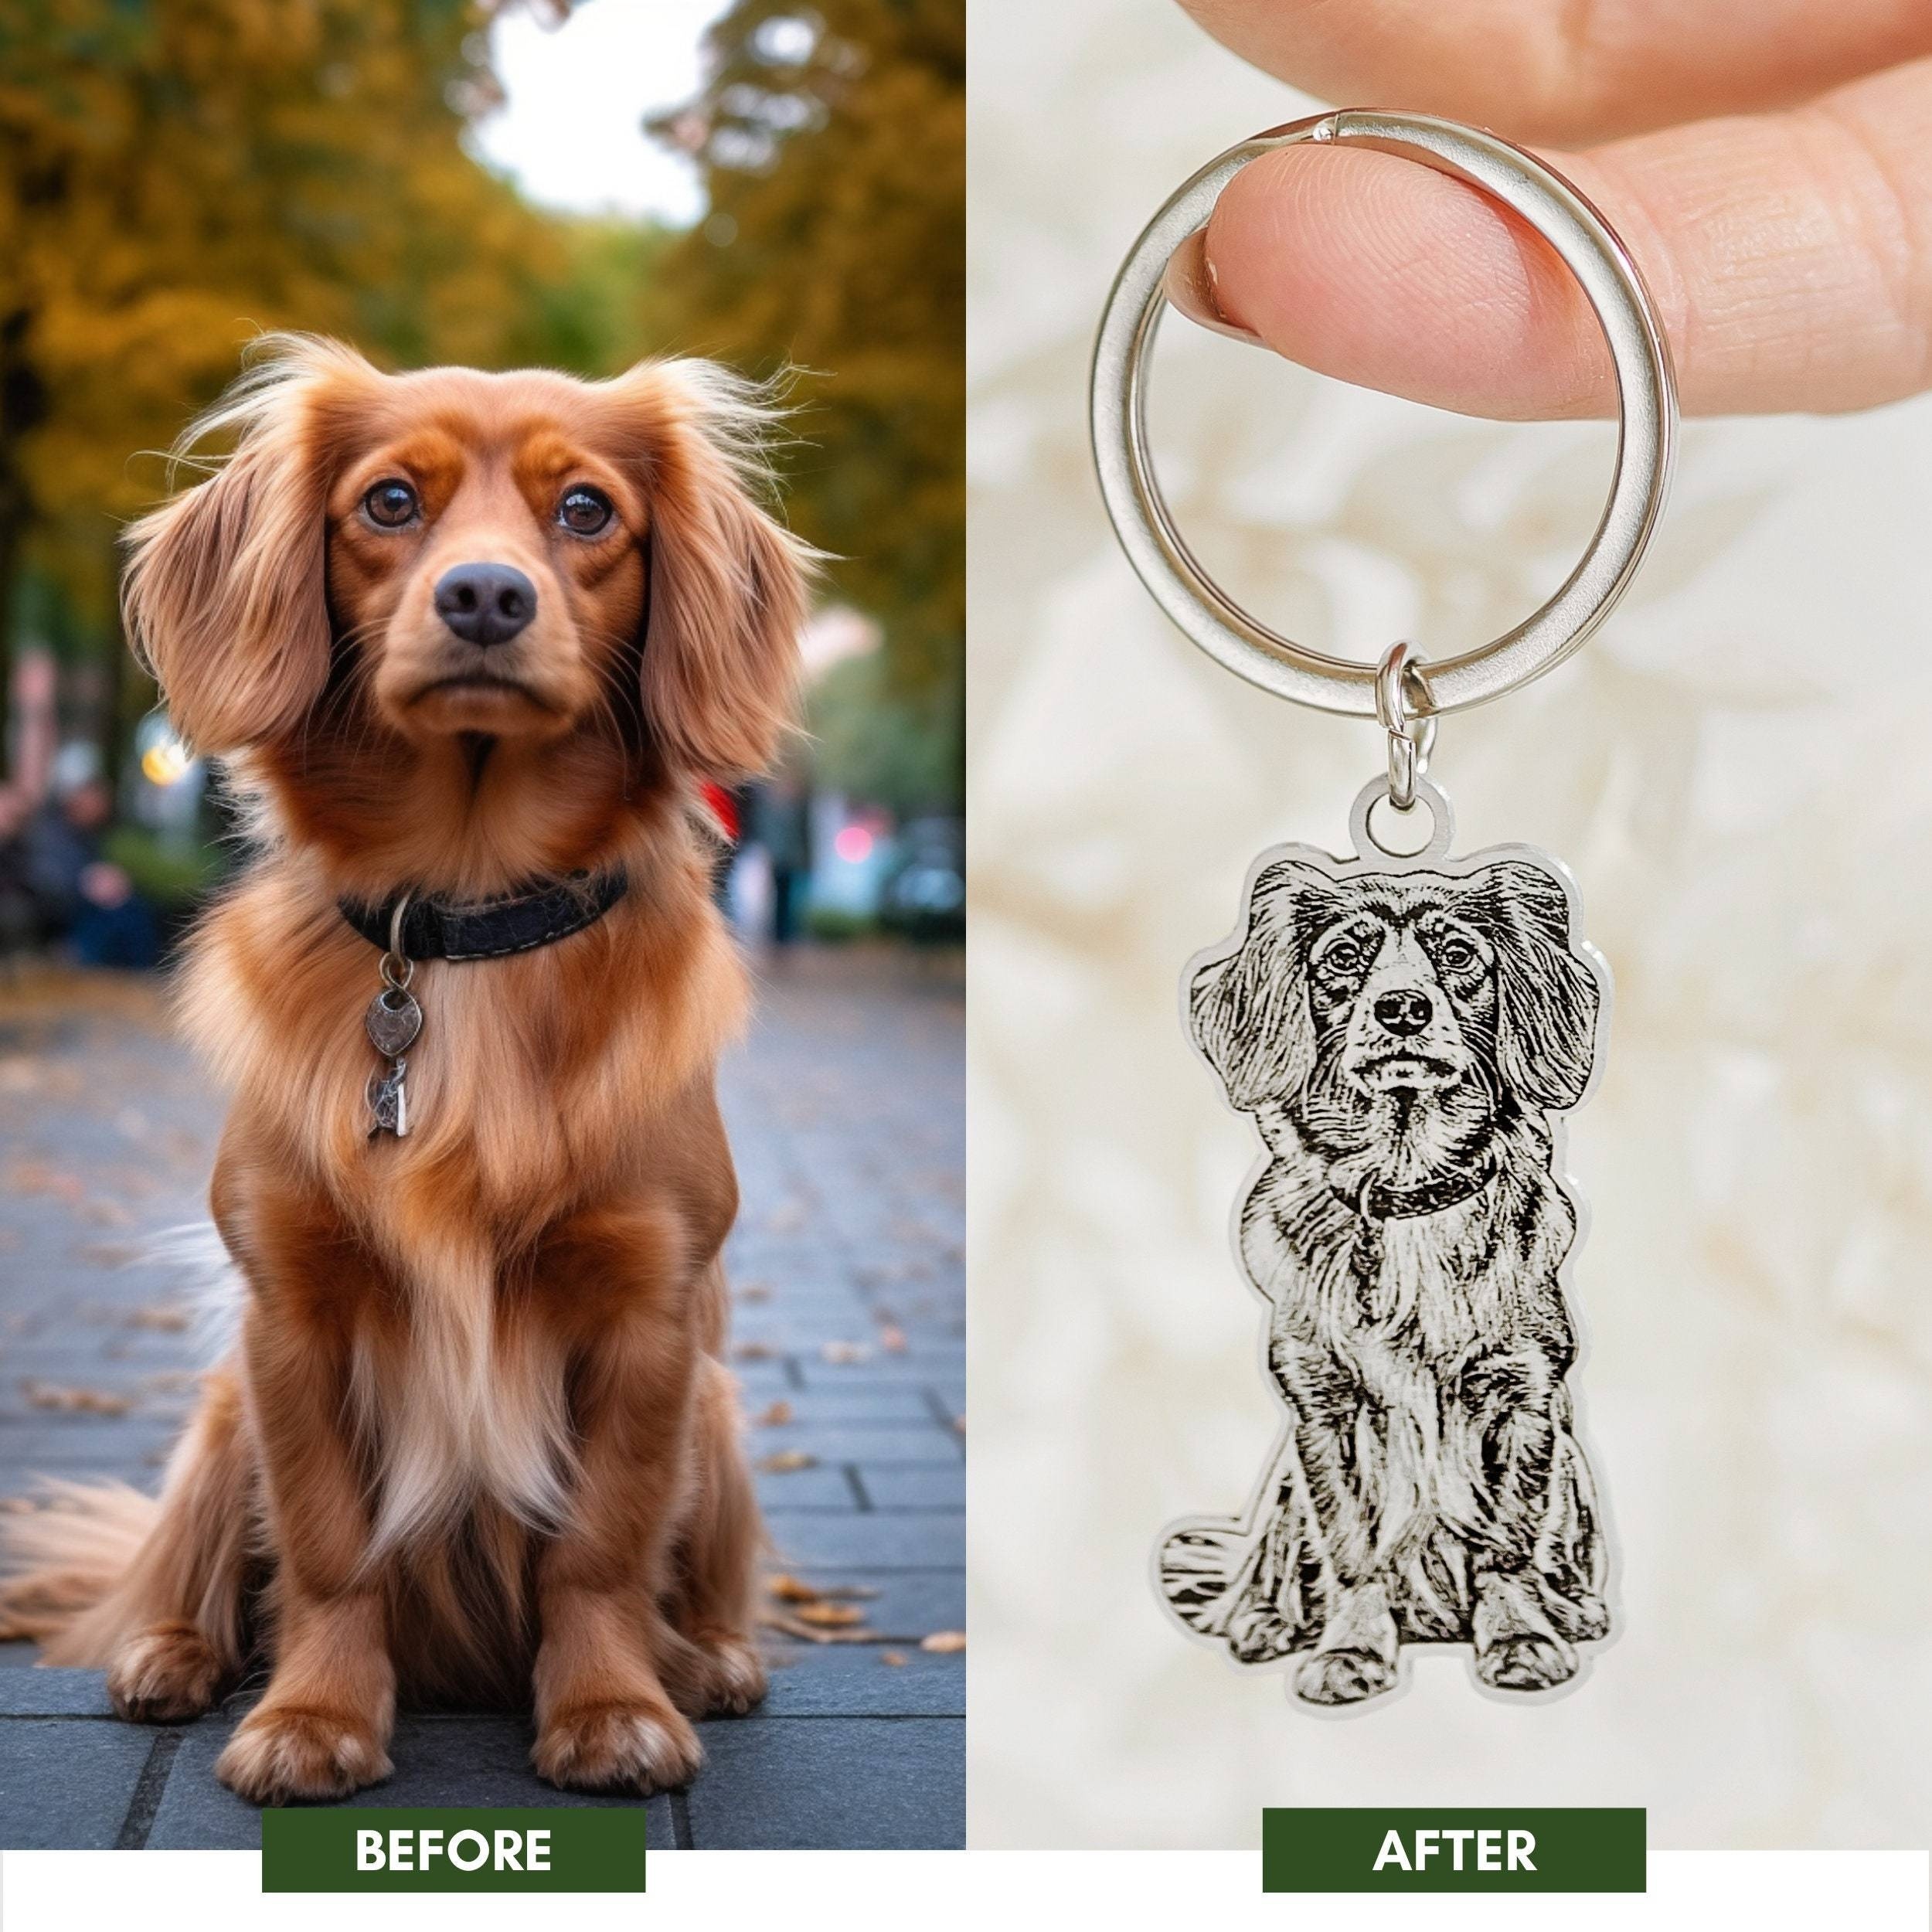 

1pc Men's Personalized Engraving Stainless Steel Customize Your Pet Photo Necklace, Dog Keychain Birthday Gift, Souvenir Memory Keychain